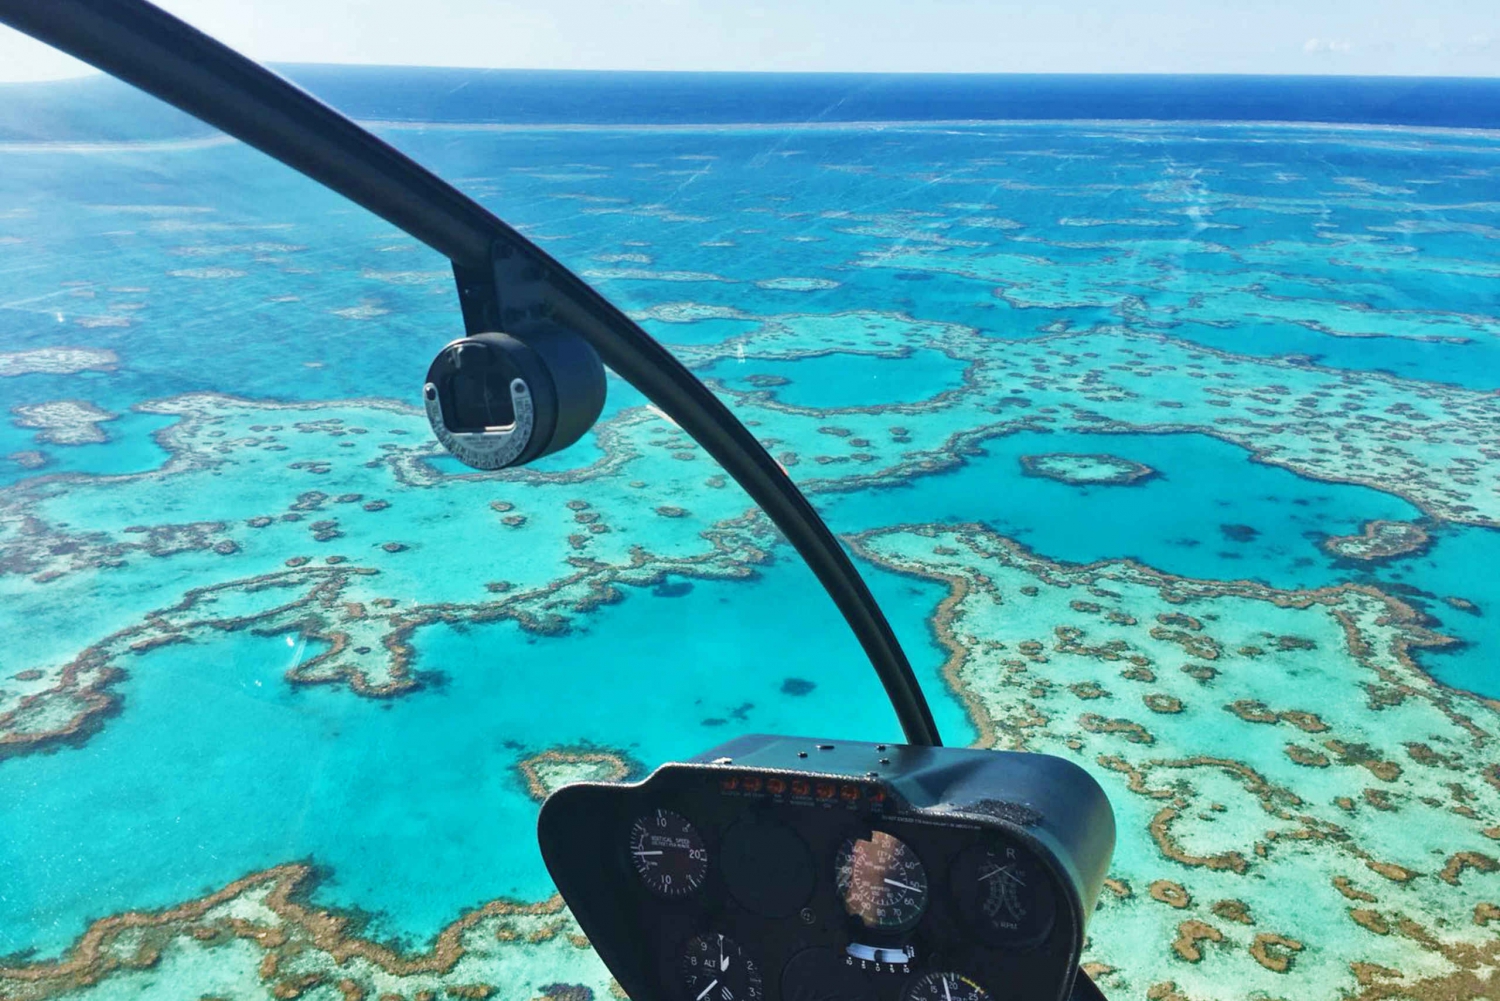 reef helicopter tours